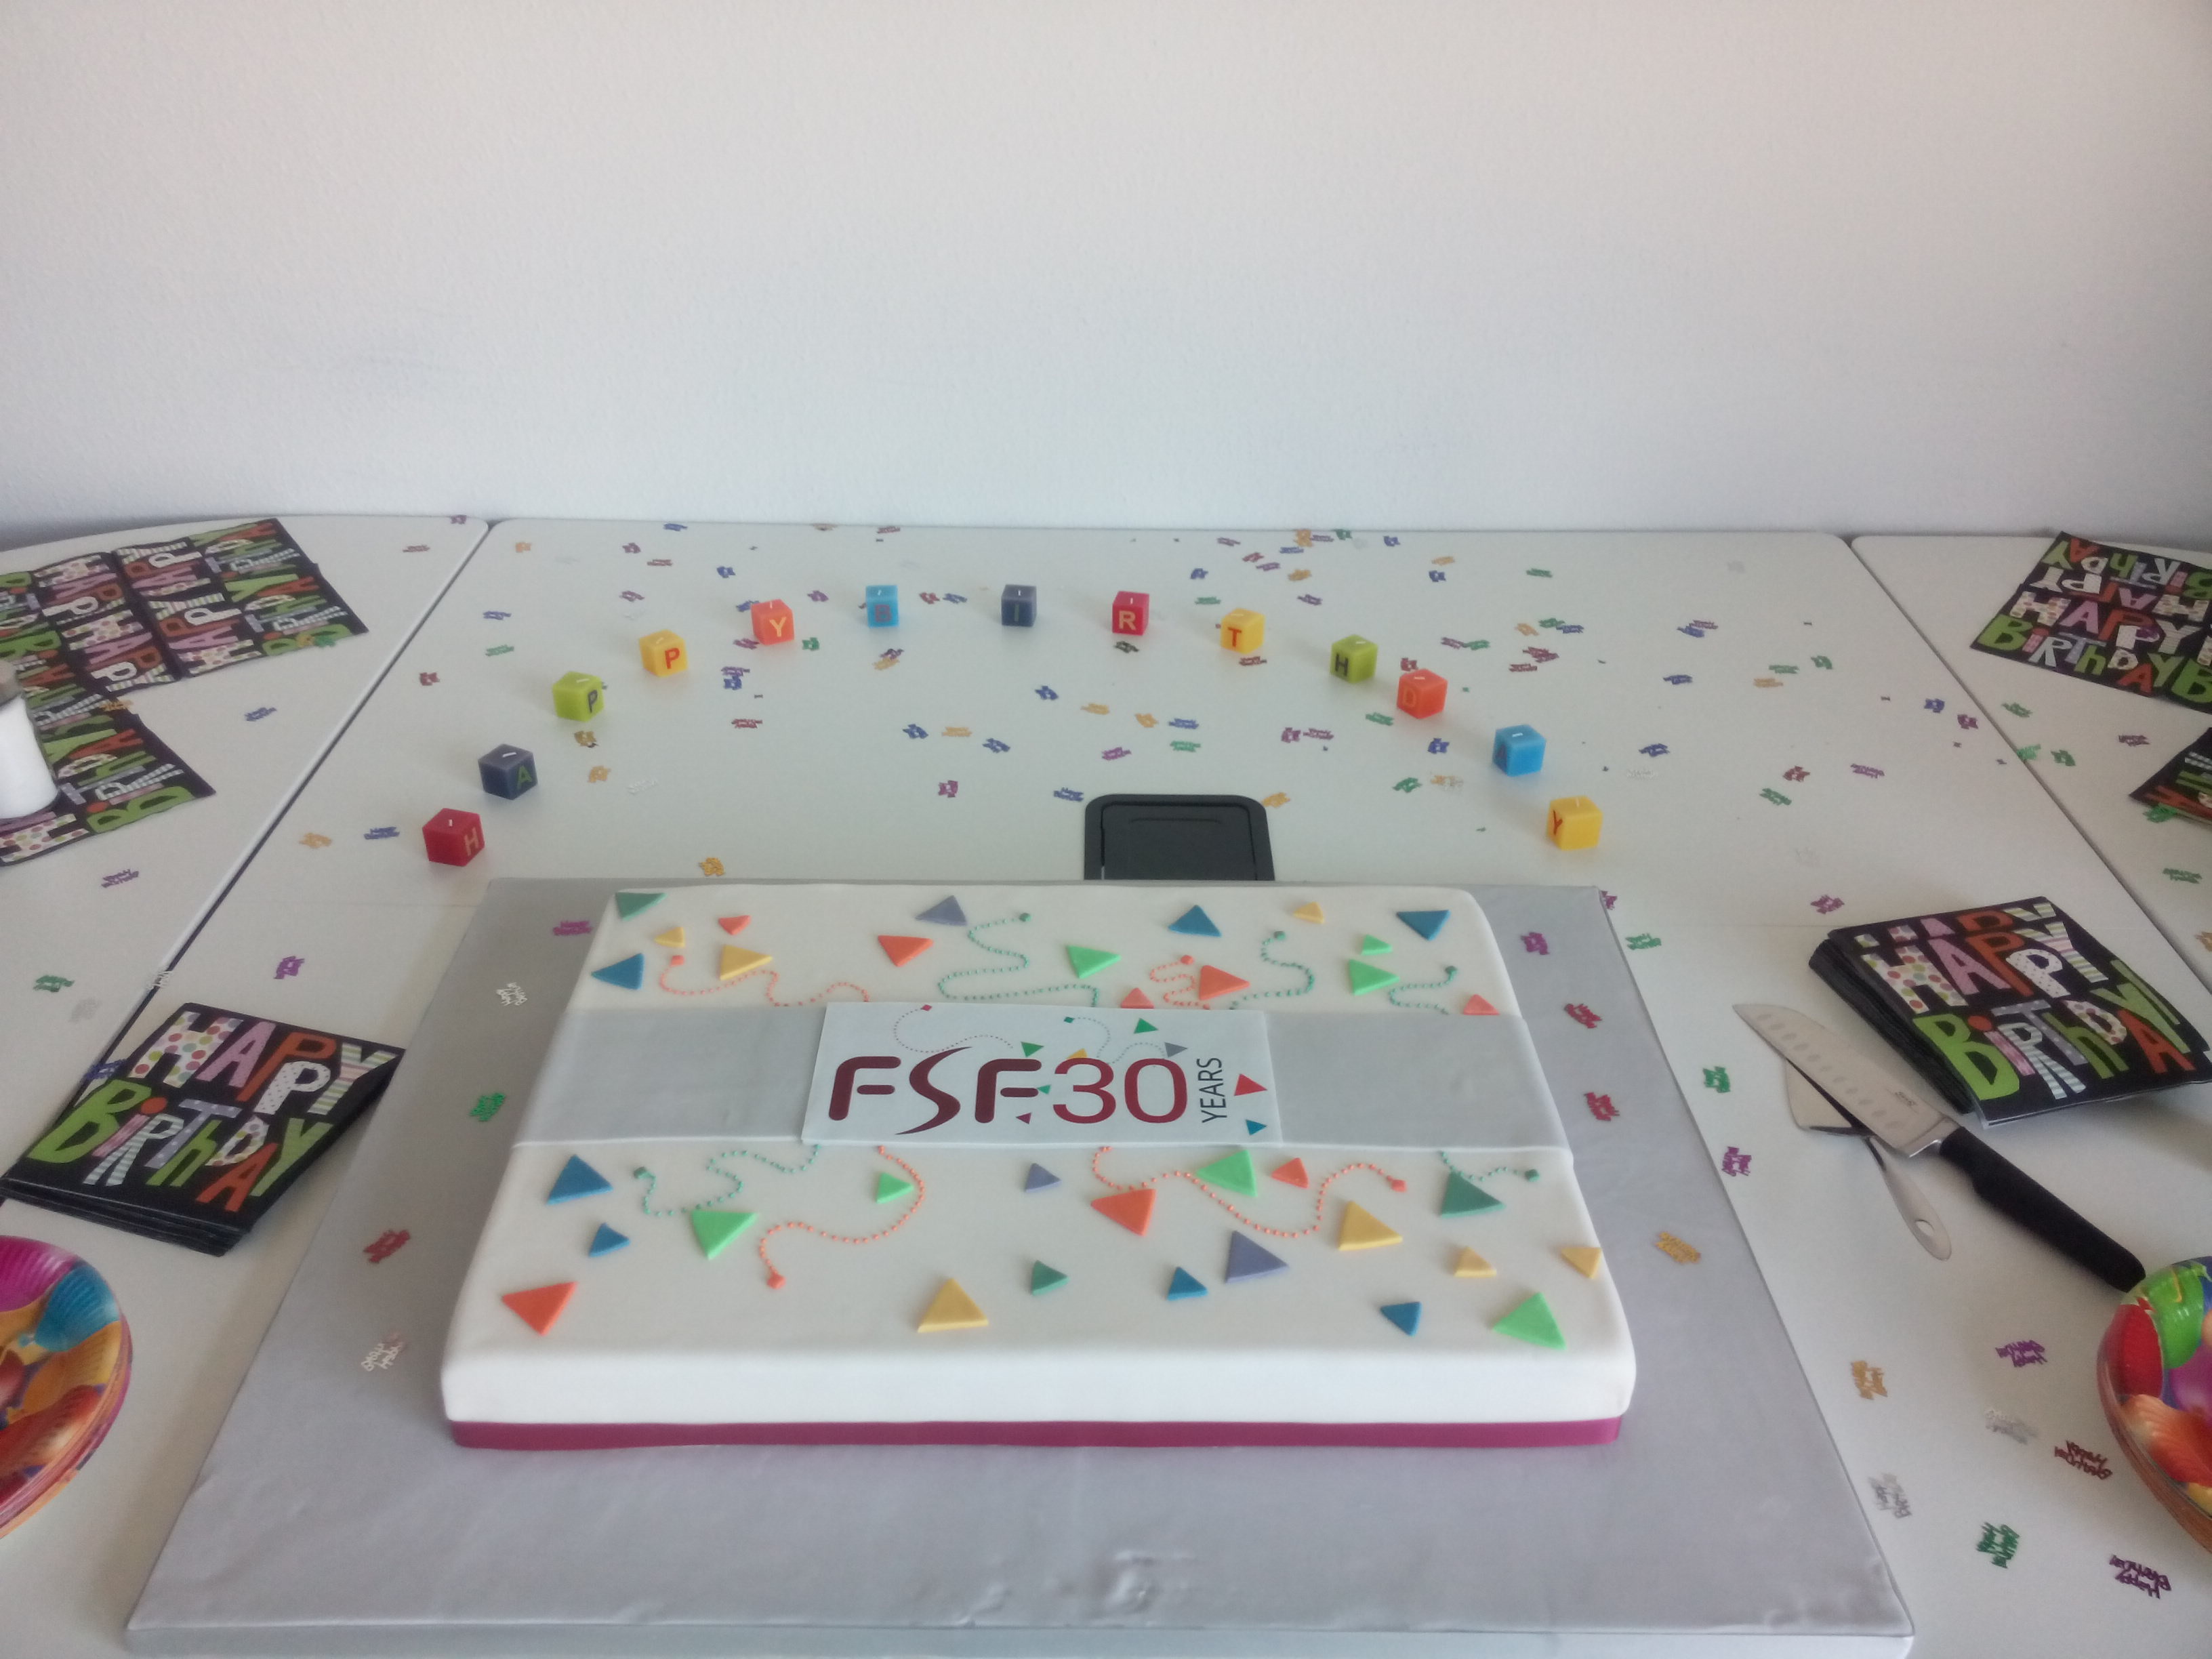 A cake with the FSF30 birthday logo on it